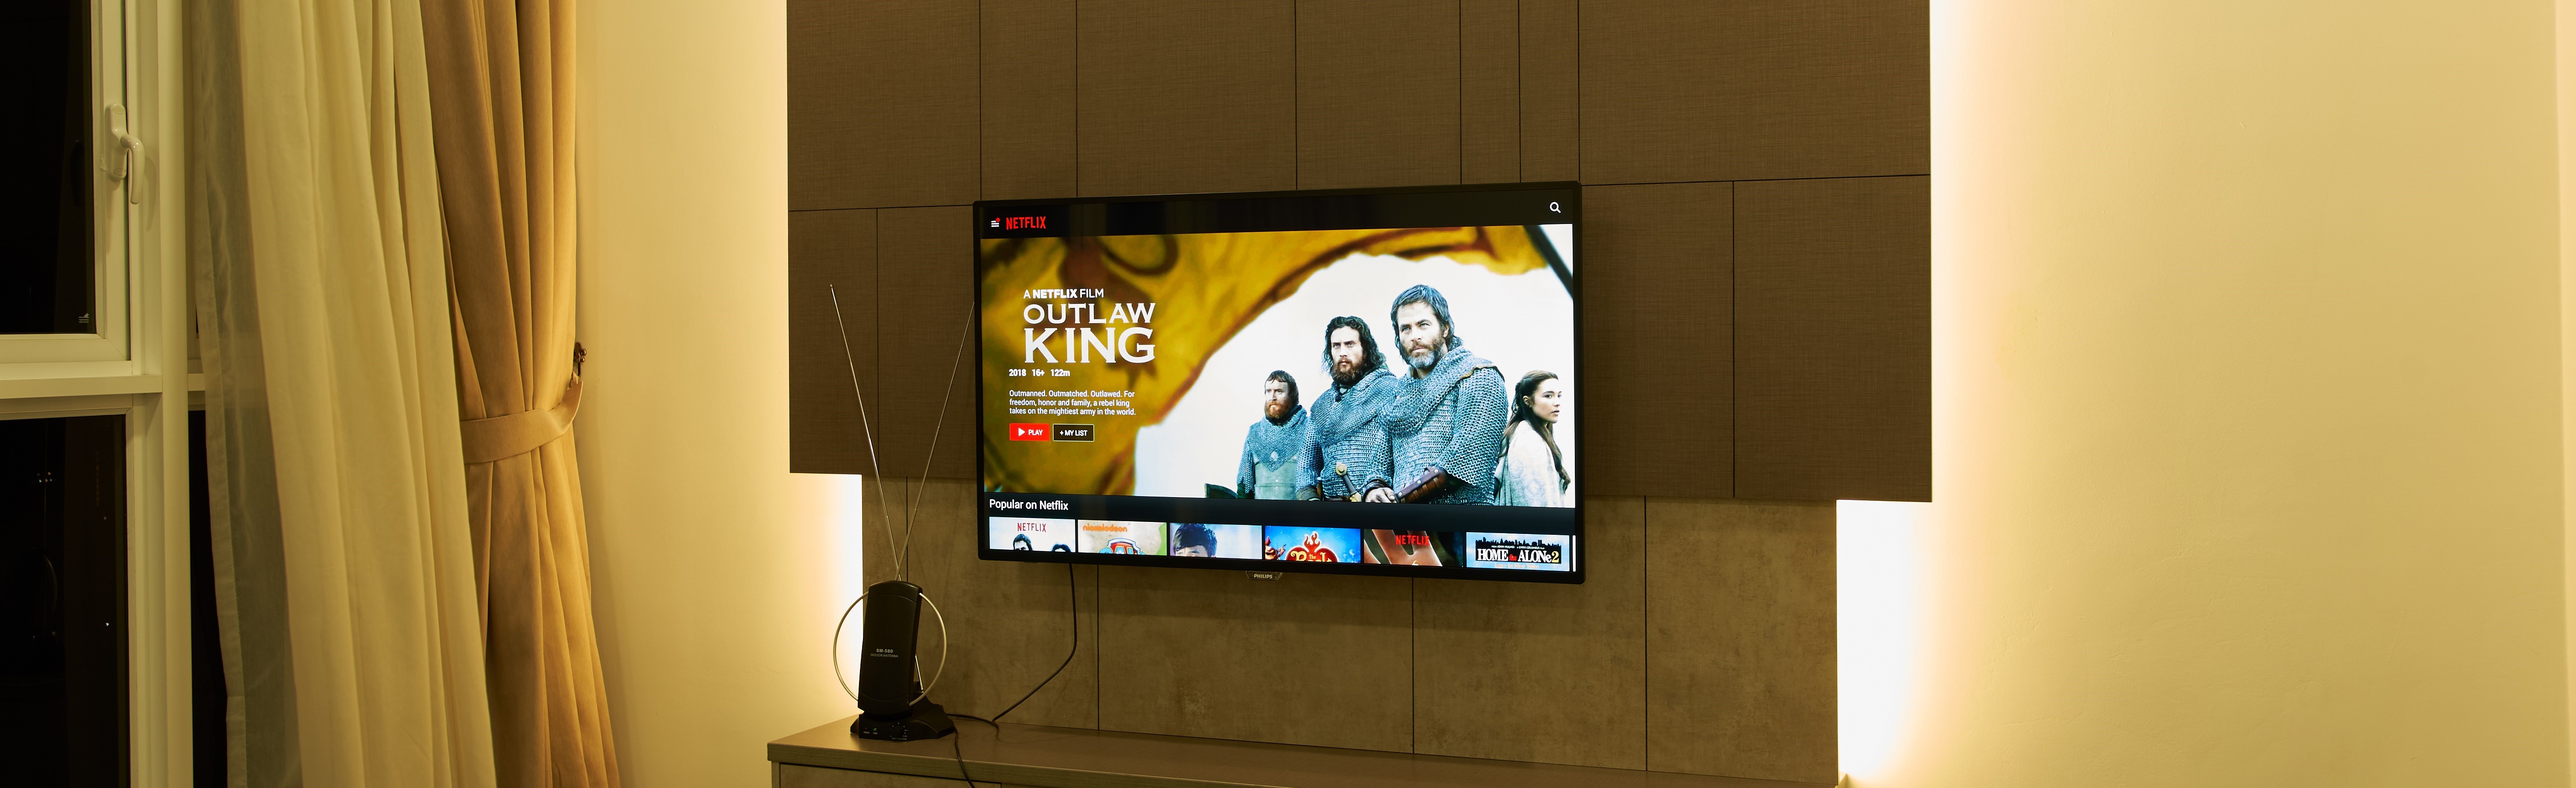 Television showing a trailer for The Outlaw King